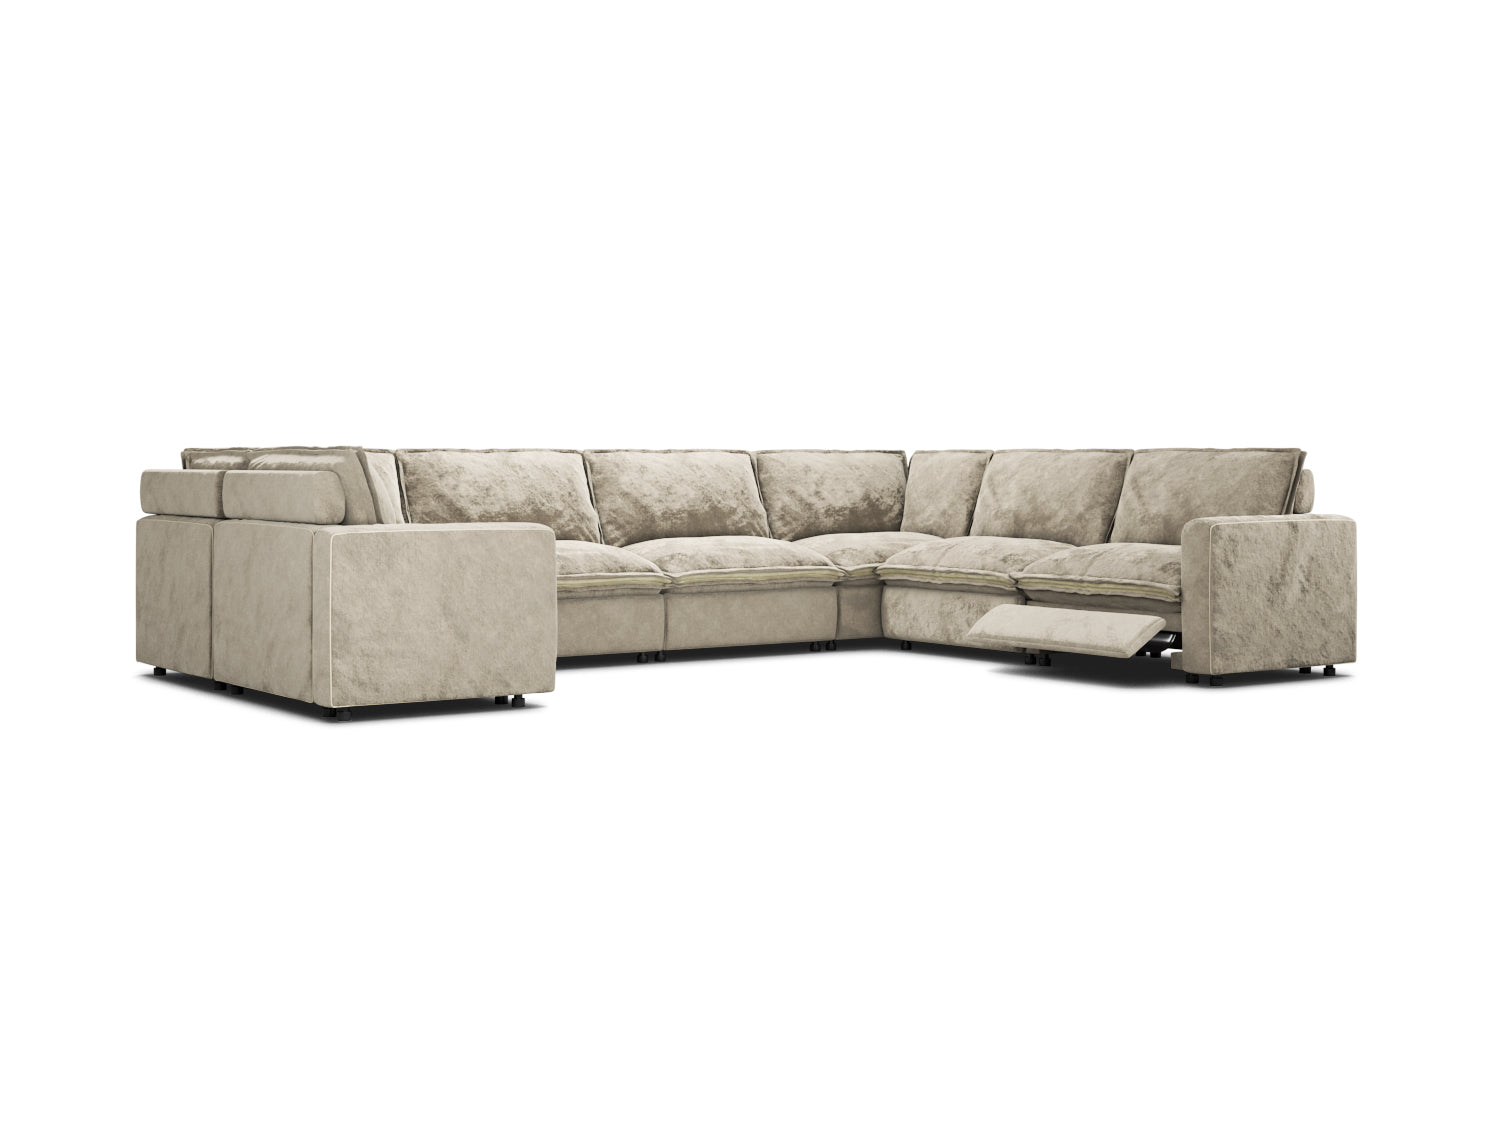 U-shaped sectional recliner couch with 2 recliners and 7 seats in beige velvet, modular